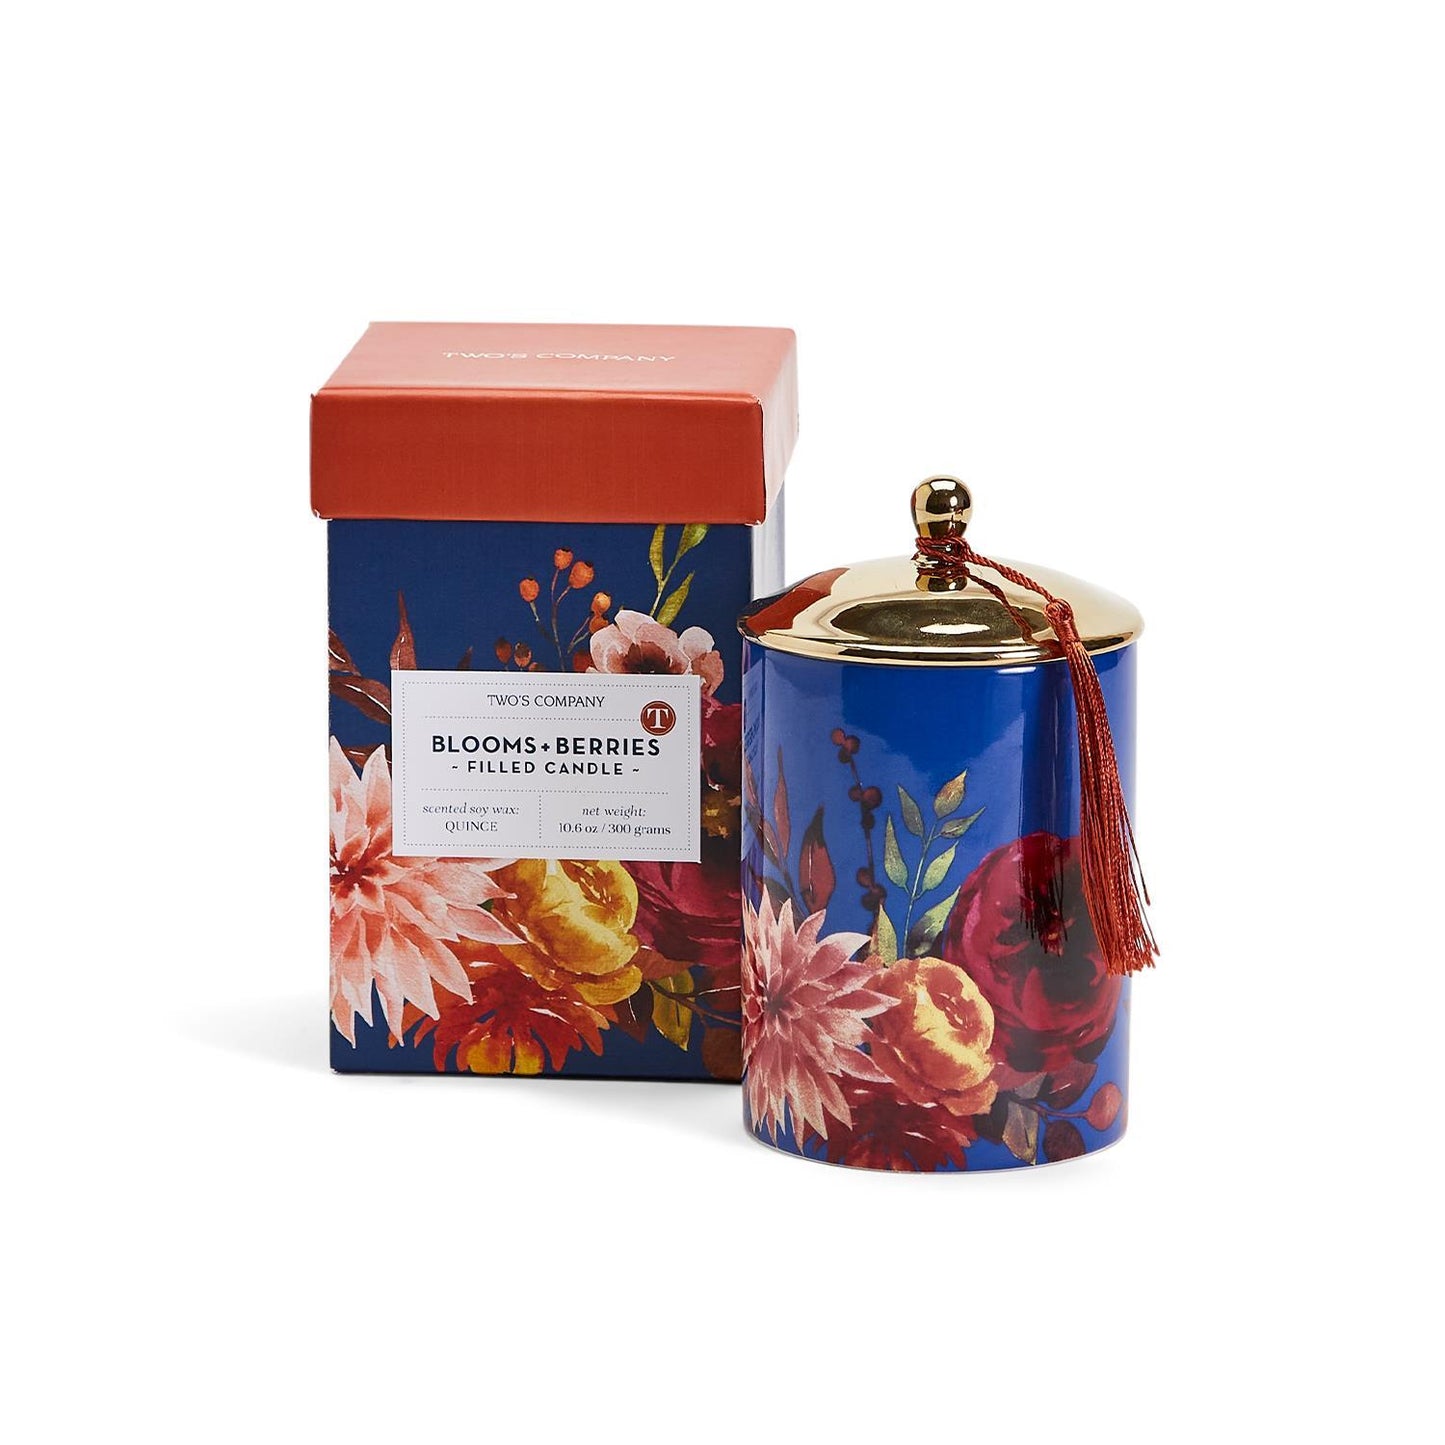 Blooms & Berries Scented Candle